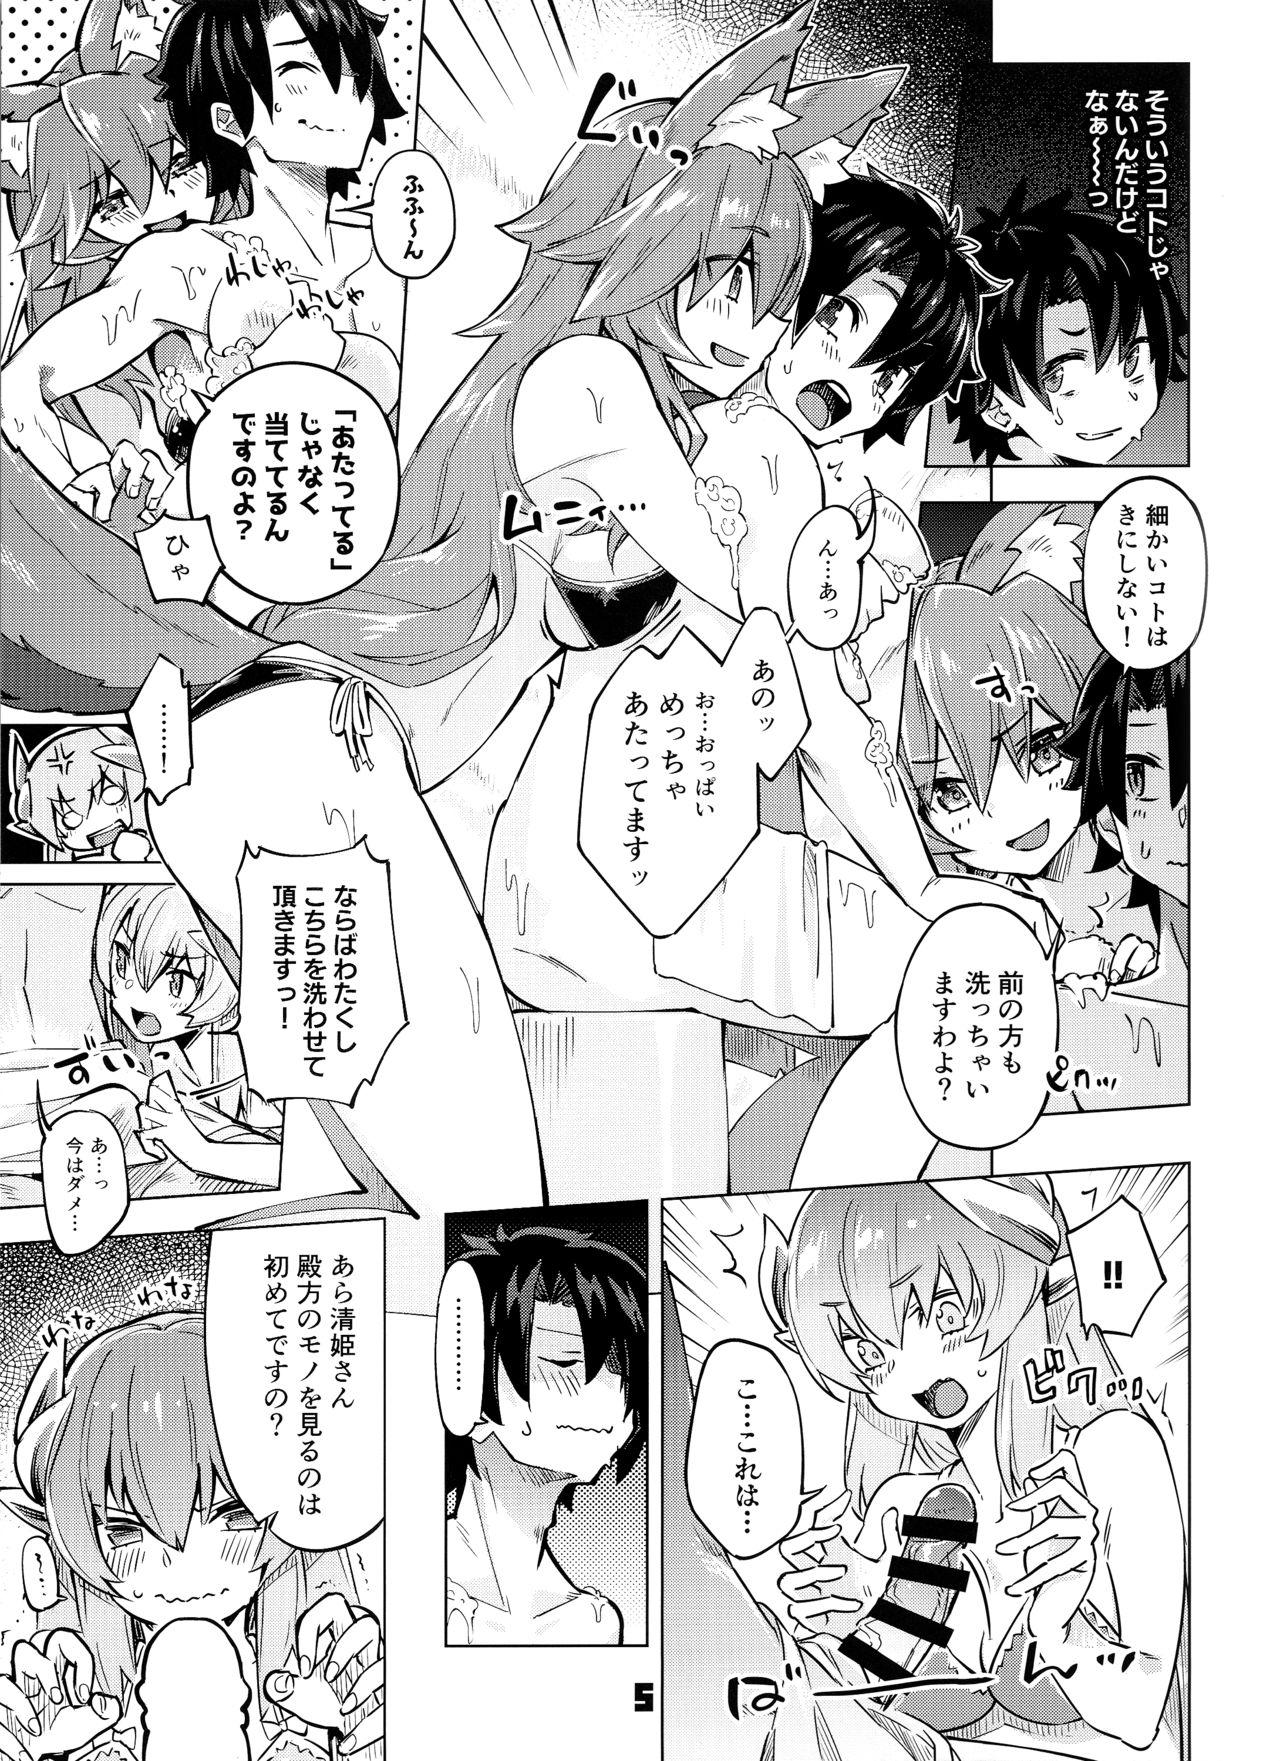 Penis Sex Shinai to Derarenai My Room 2 - My room can not go out - Fate grand order Dominant - Page 4